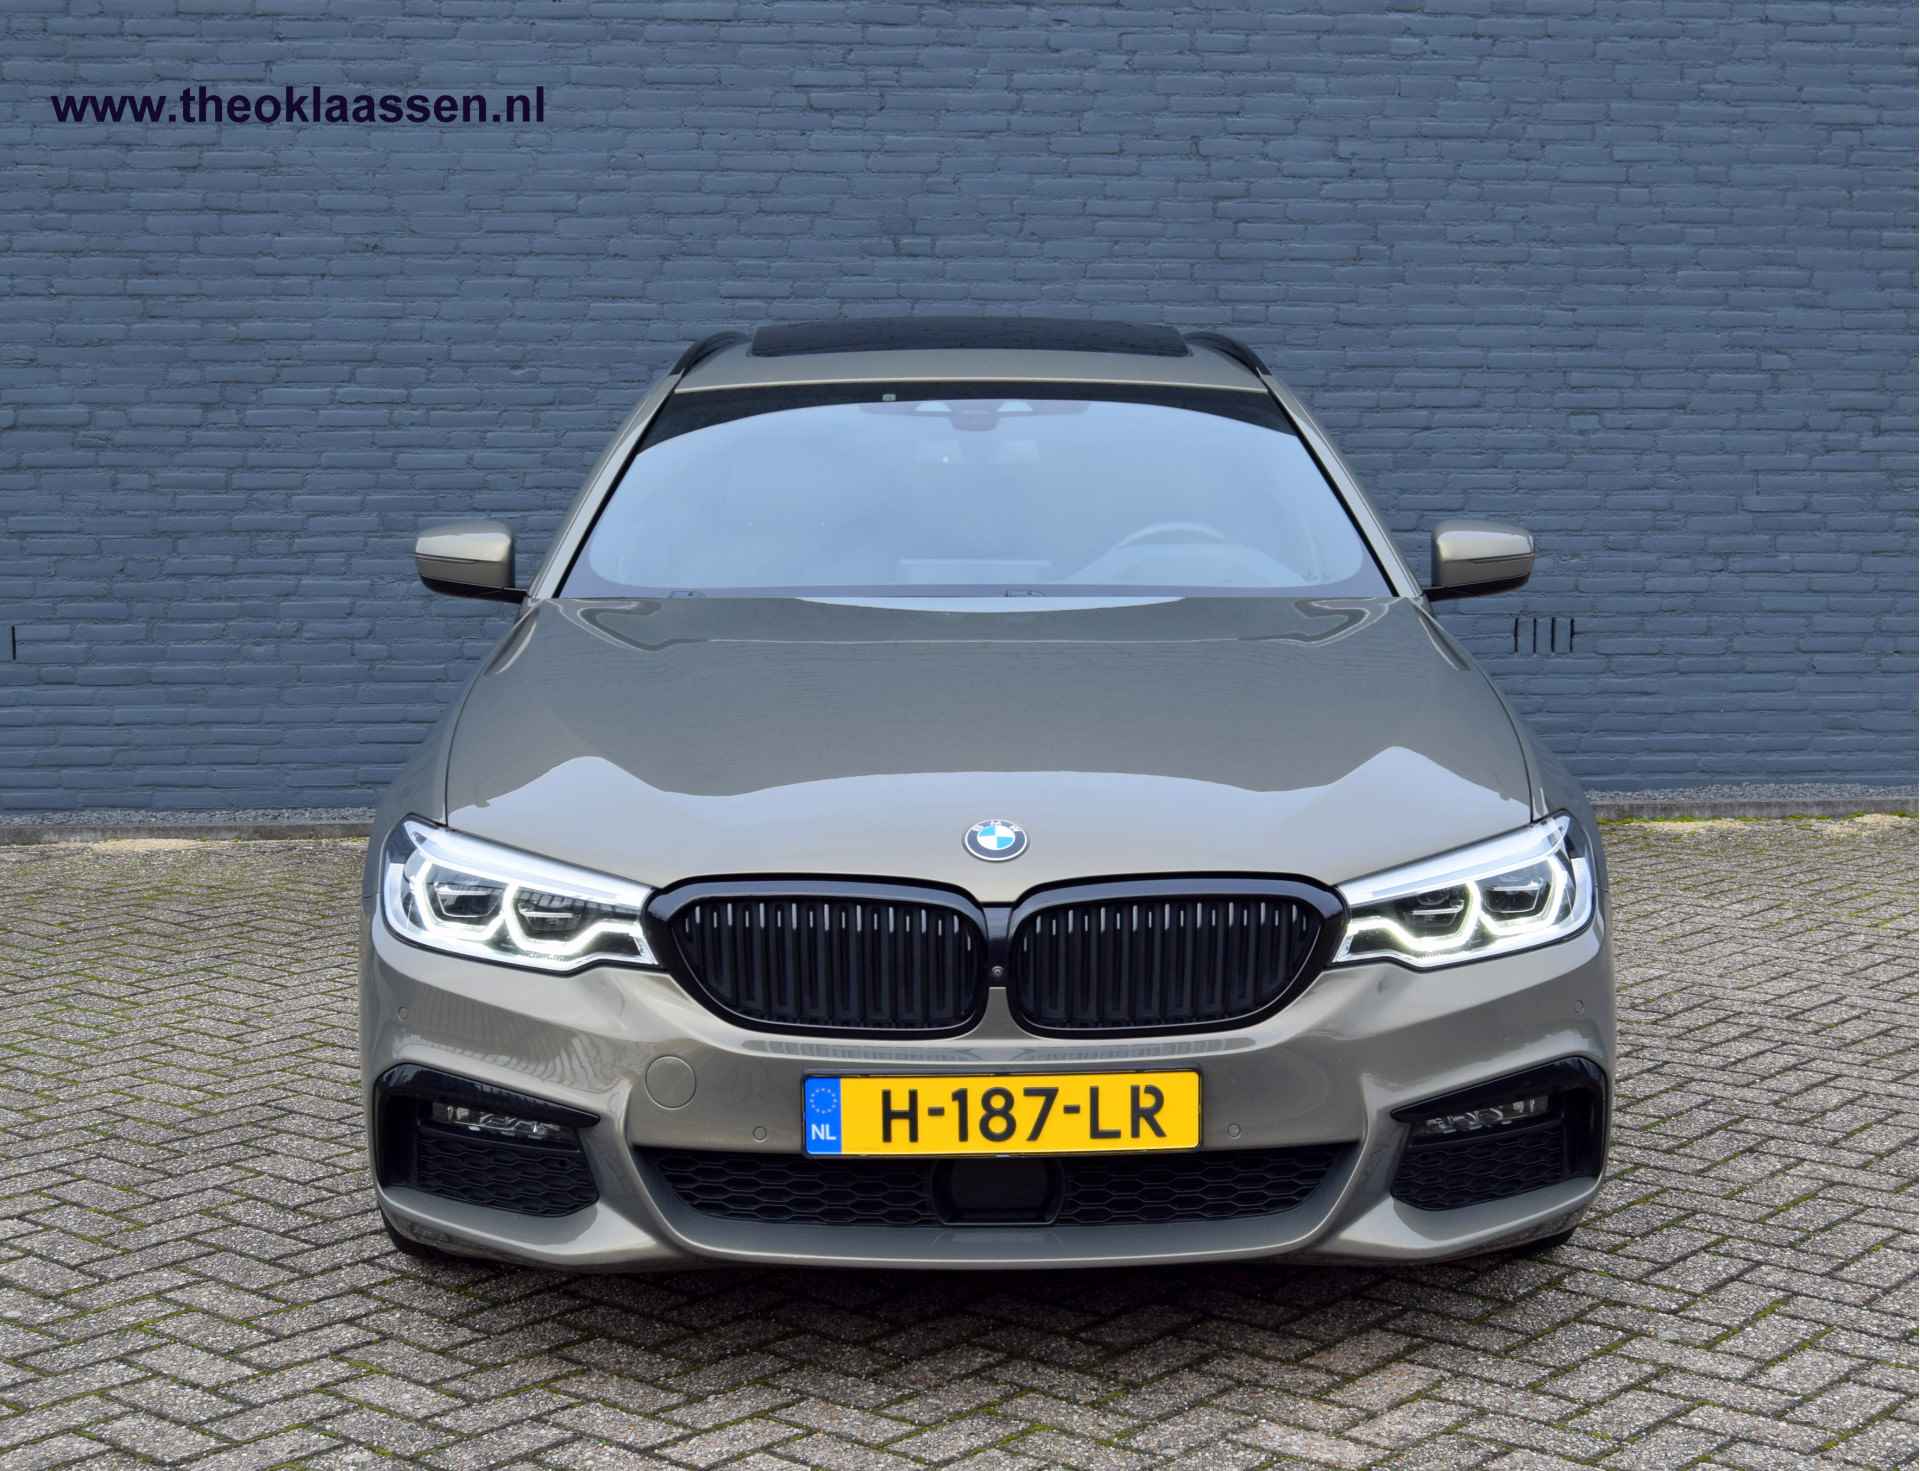 BMW 5 Serie Touring 530i High Executive M-Sport Individual Full-Options - 9/53